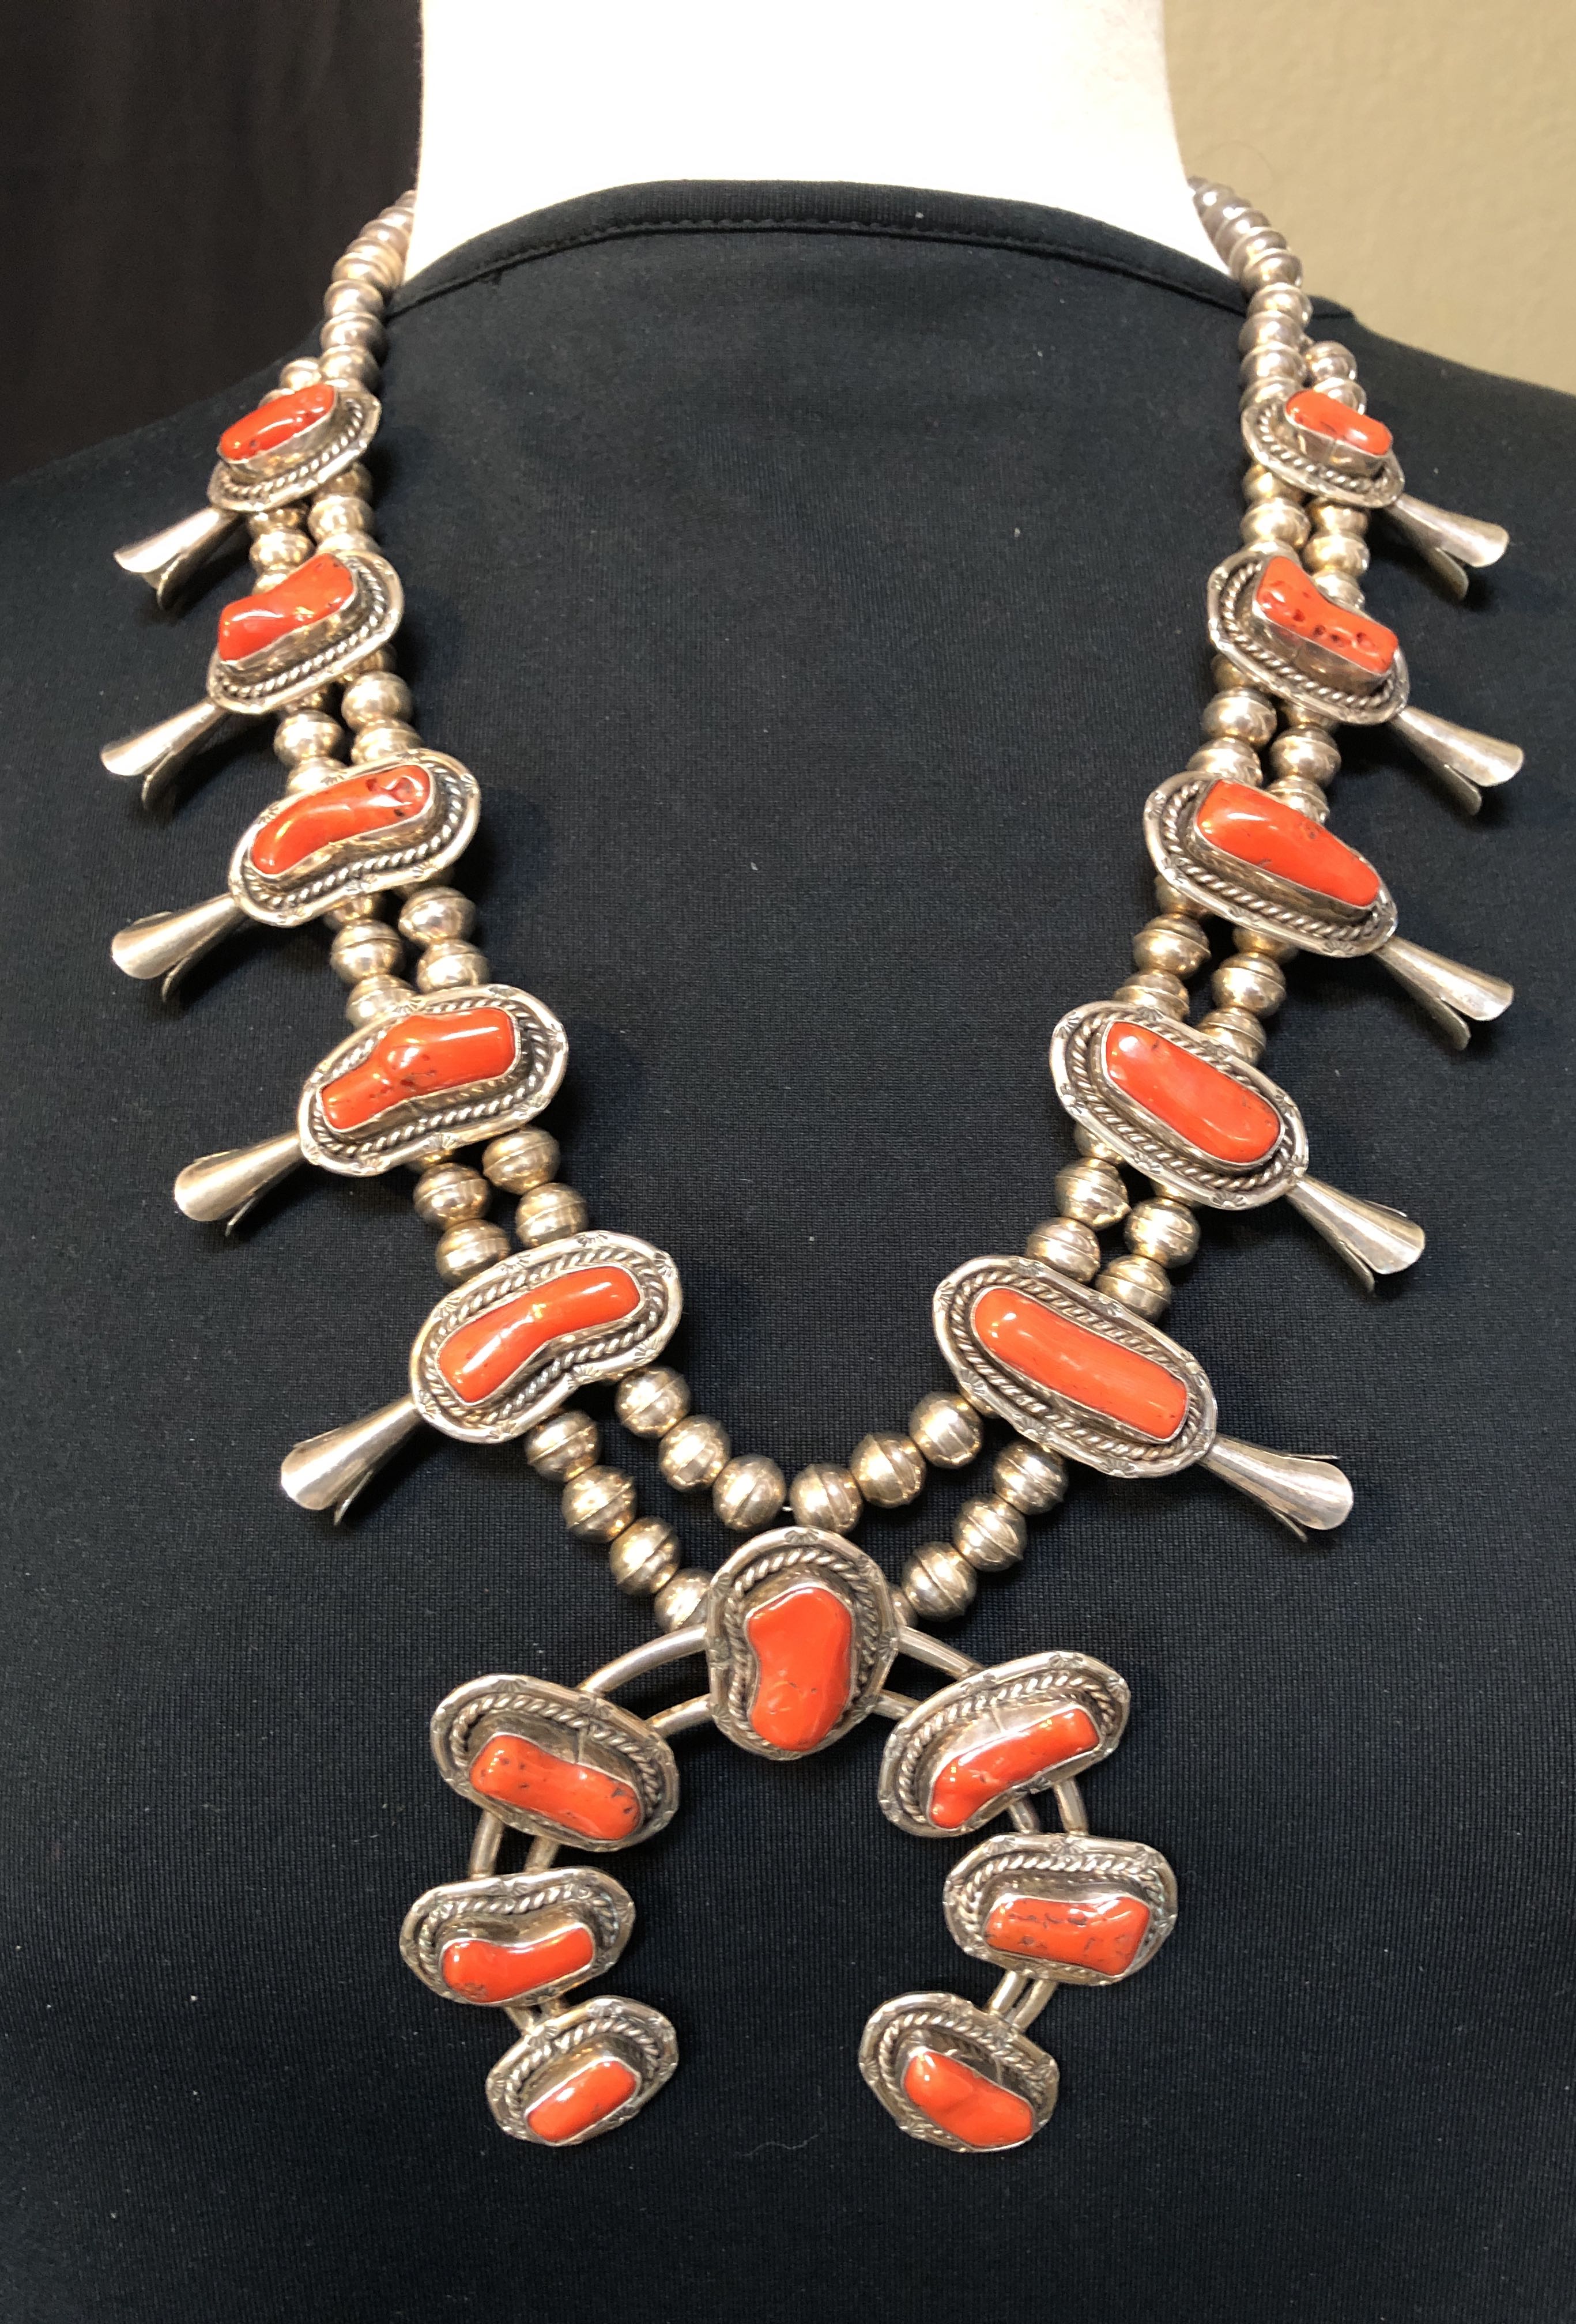 Lot 534: Navajo Coral & Silver Squash Blossom Necklace w/ Delbert Chatter  Earrings | Case Auctions